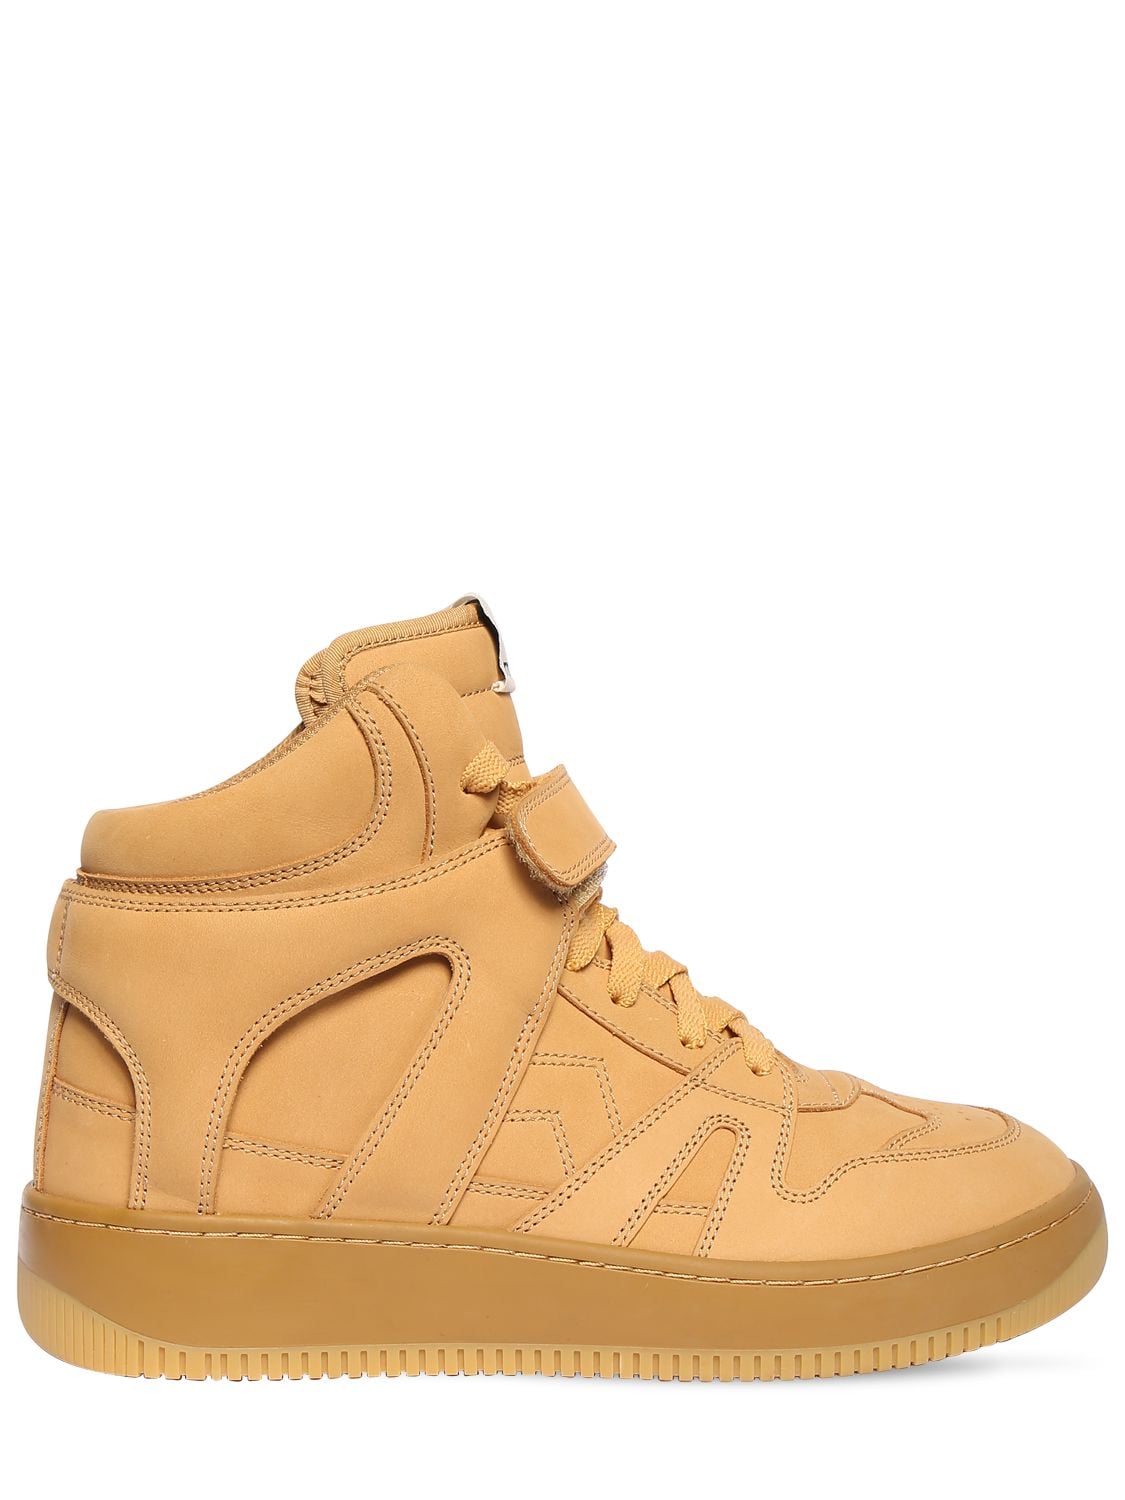 ISABEL MARANT 30MM BROOKLEE LEATHER HIGH TOP SNEAKERS,72IE1C017-NTBD0